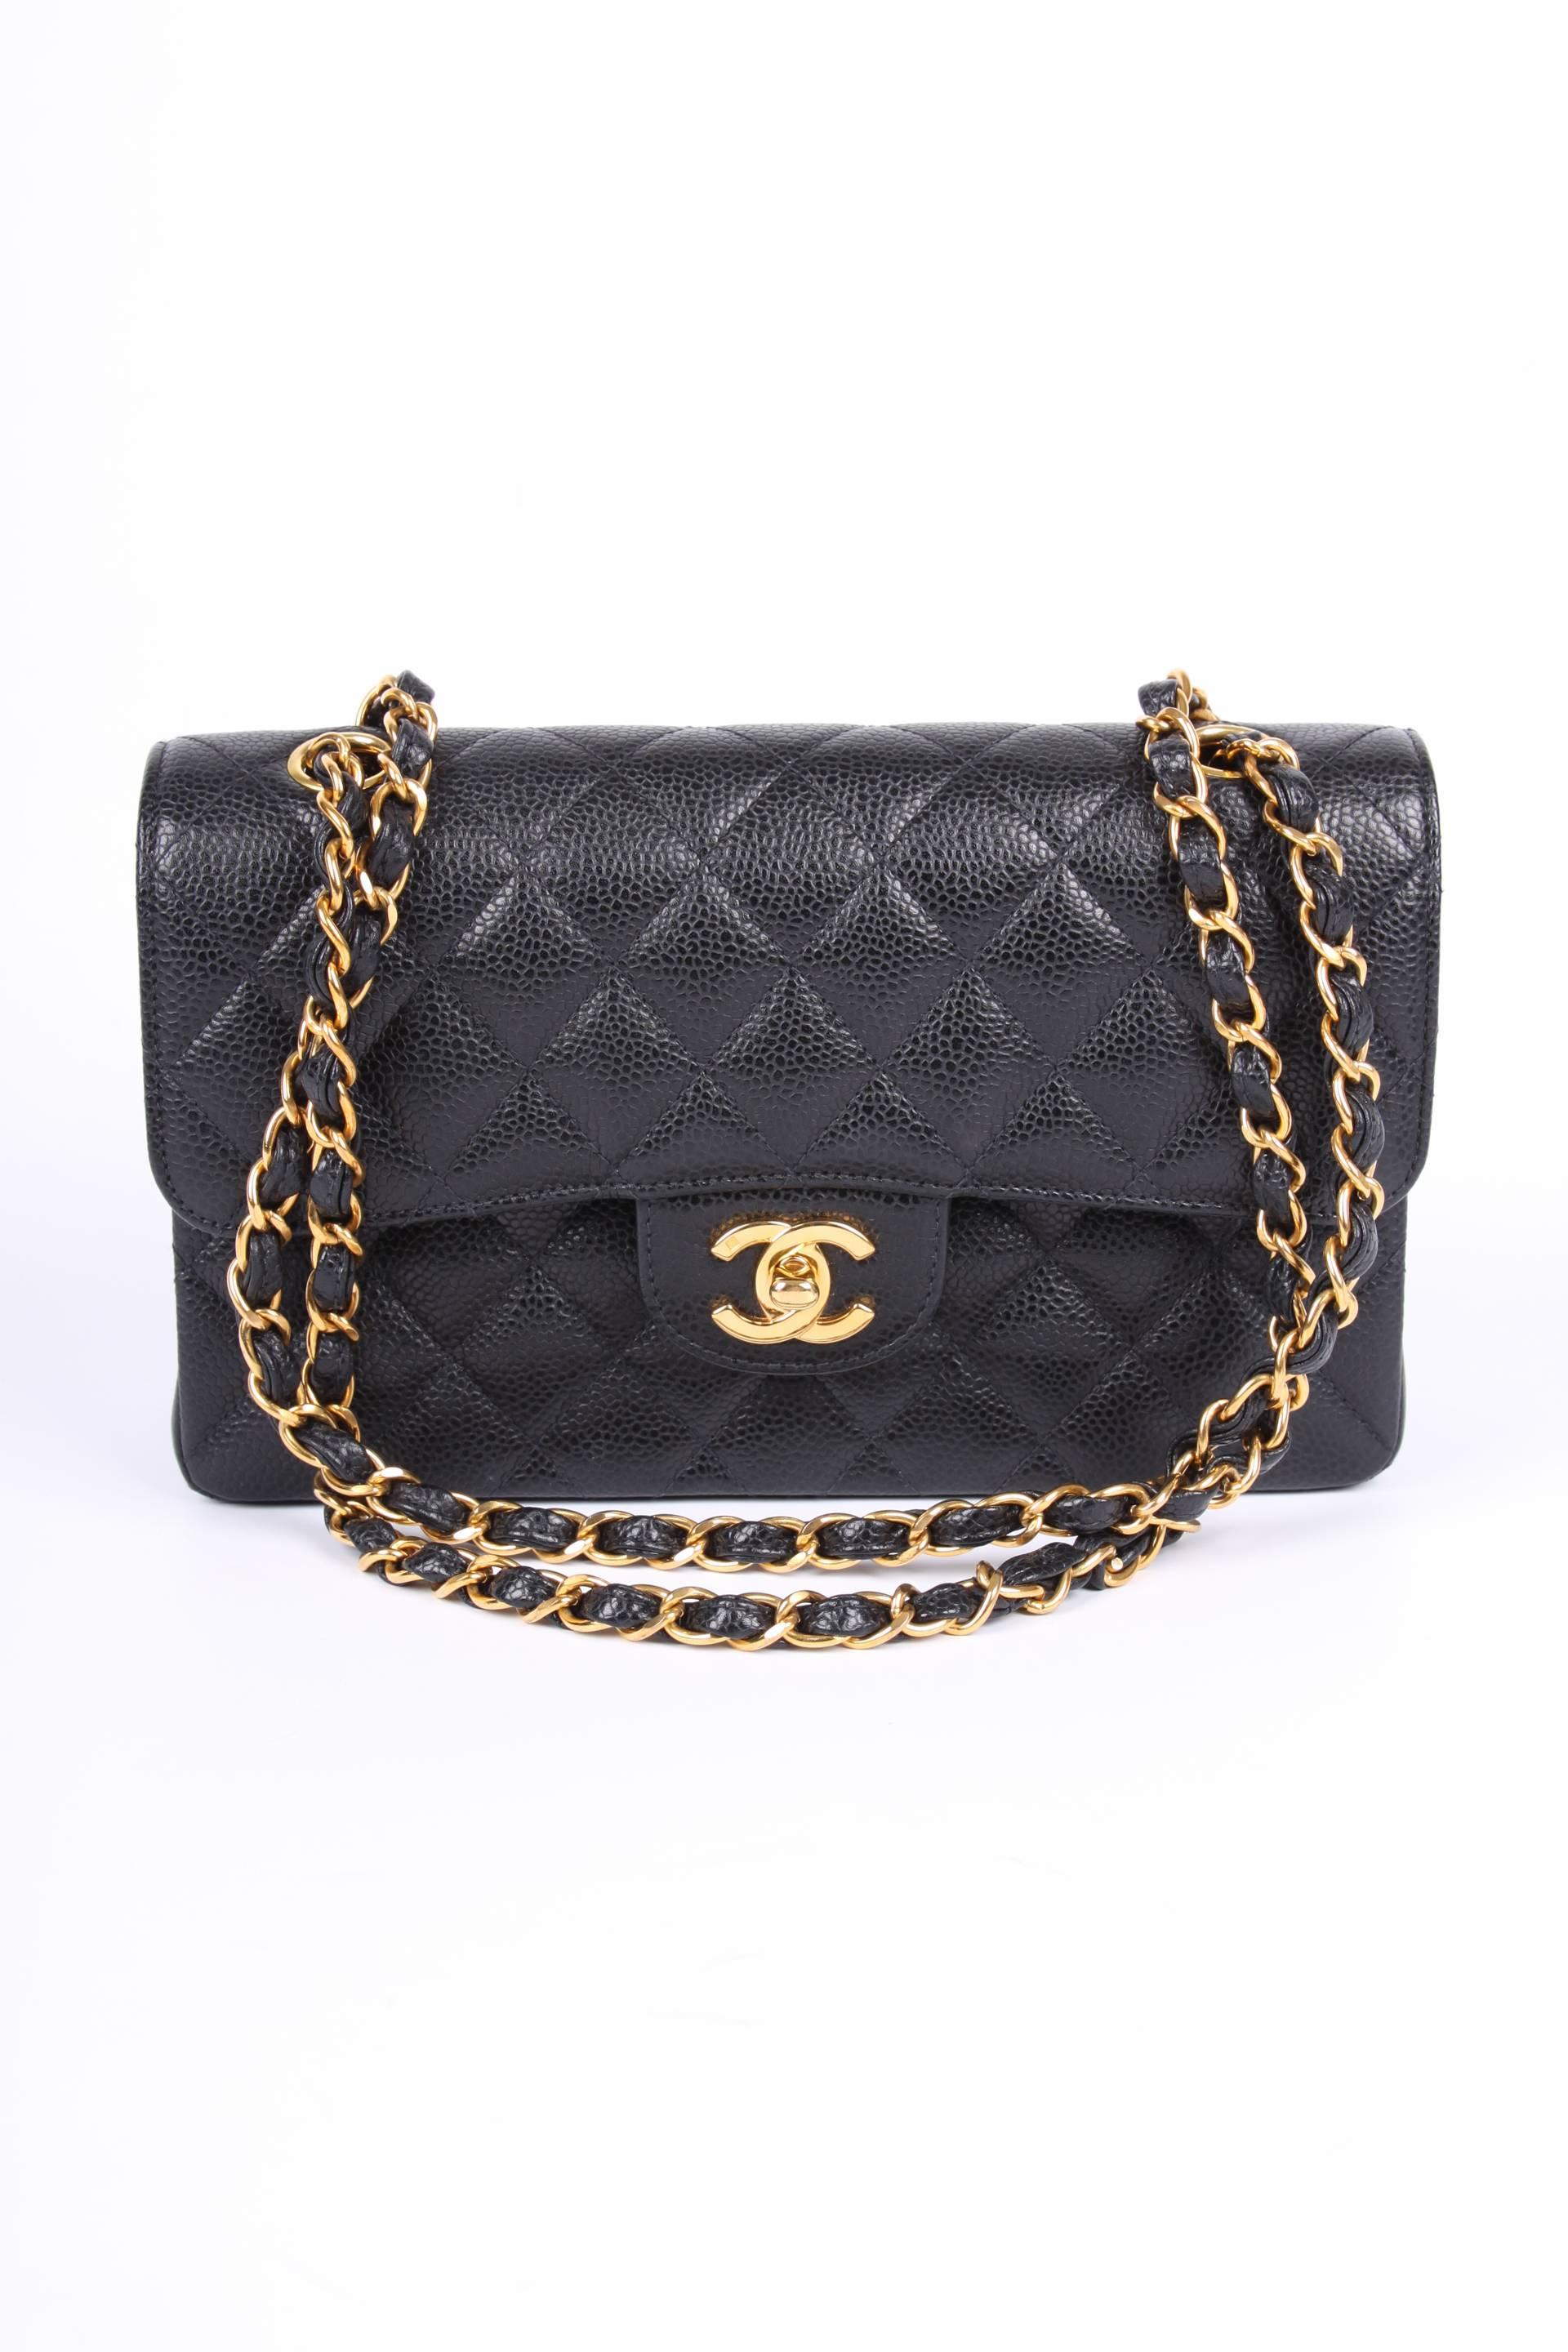 Chanel 2.55 Timeless Small Double Flap Bag - black caviar leather 2